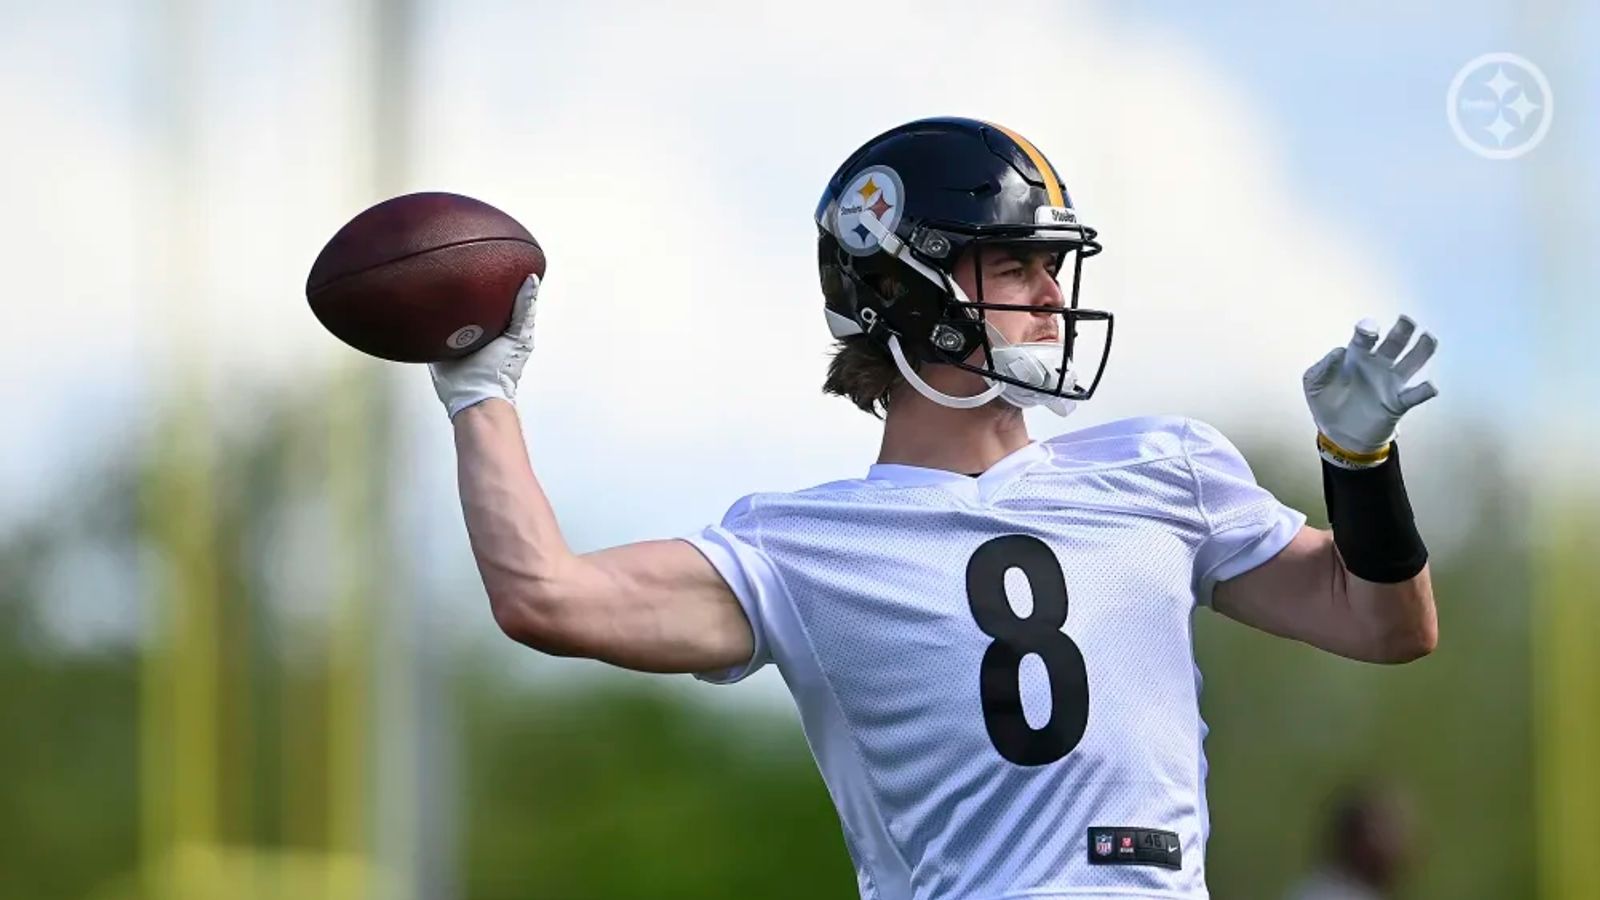 Joe Burrow 'good to go' for Steelers; talks about hanging out with